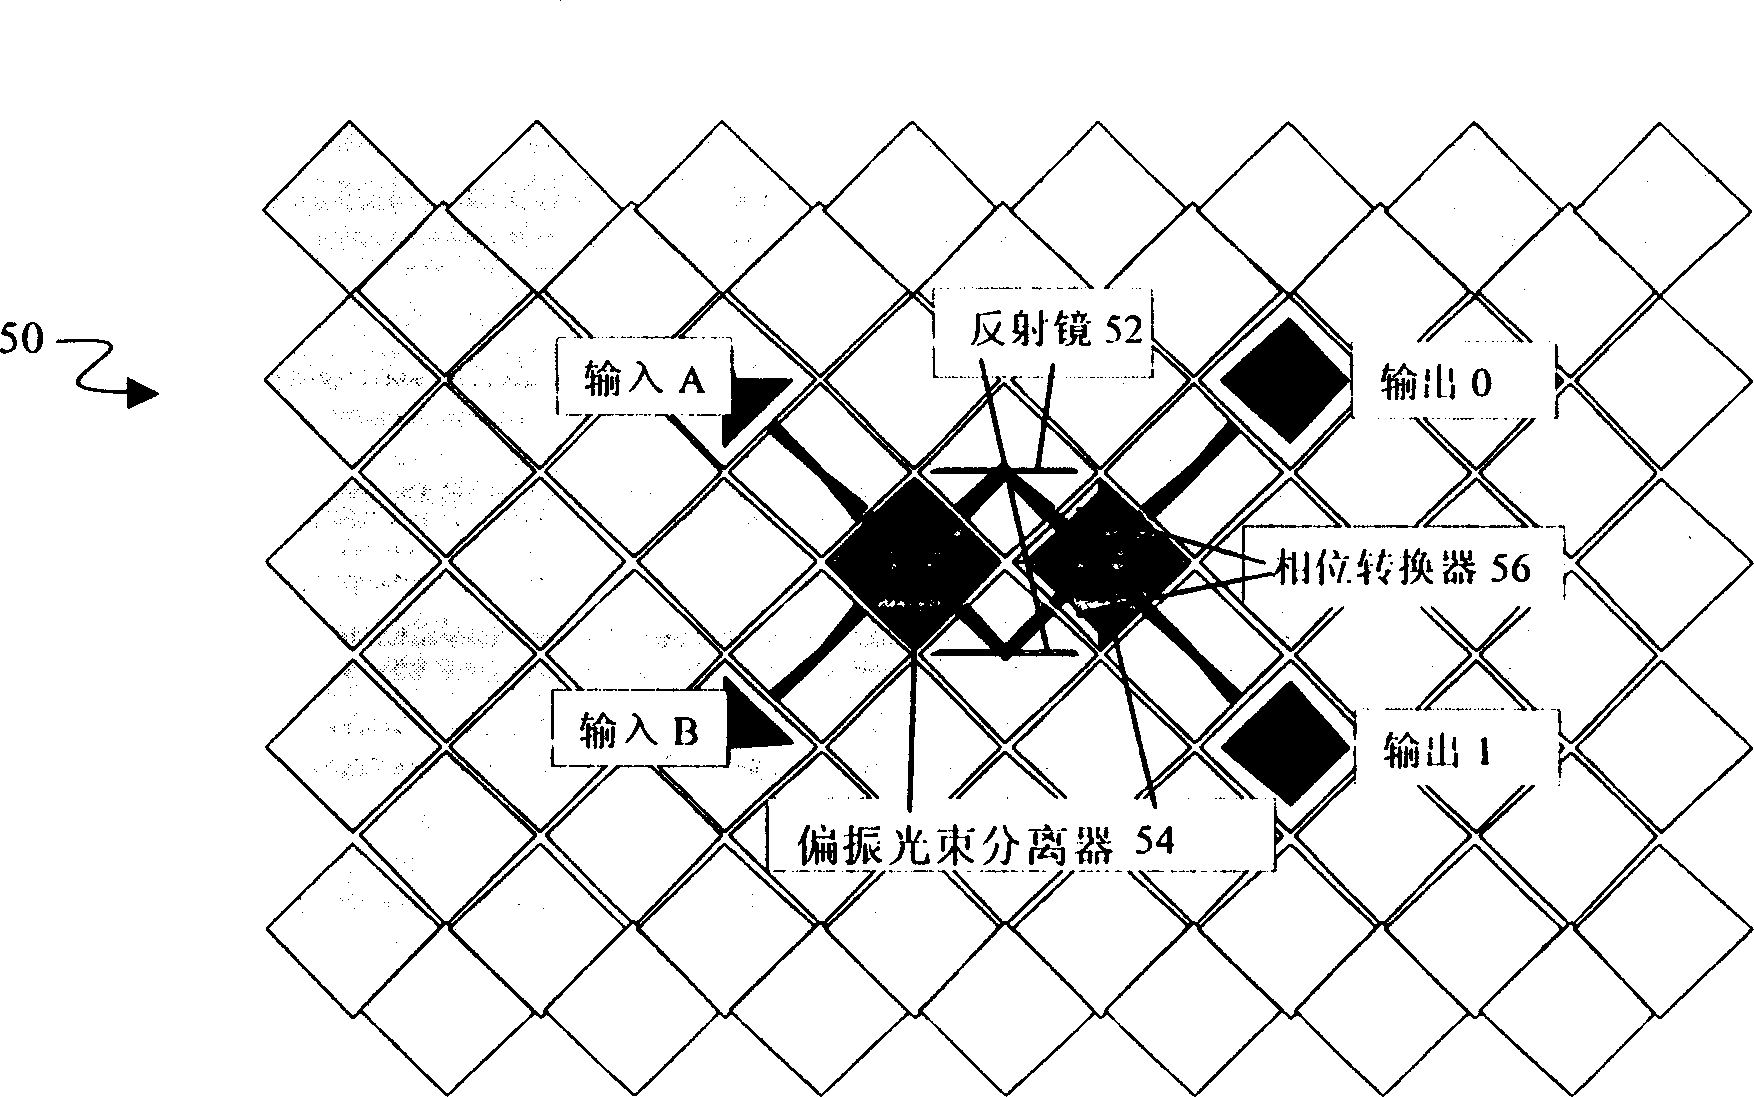 Plarization idependent non-blocking all-optical switching device